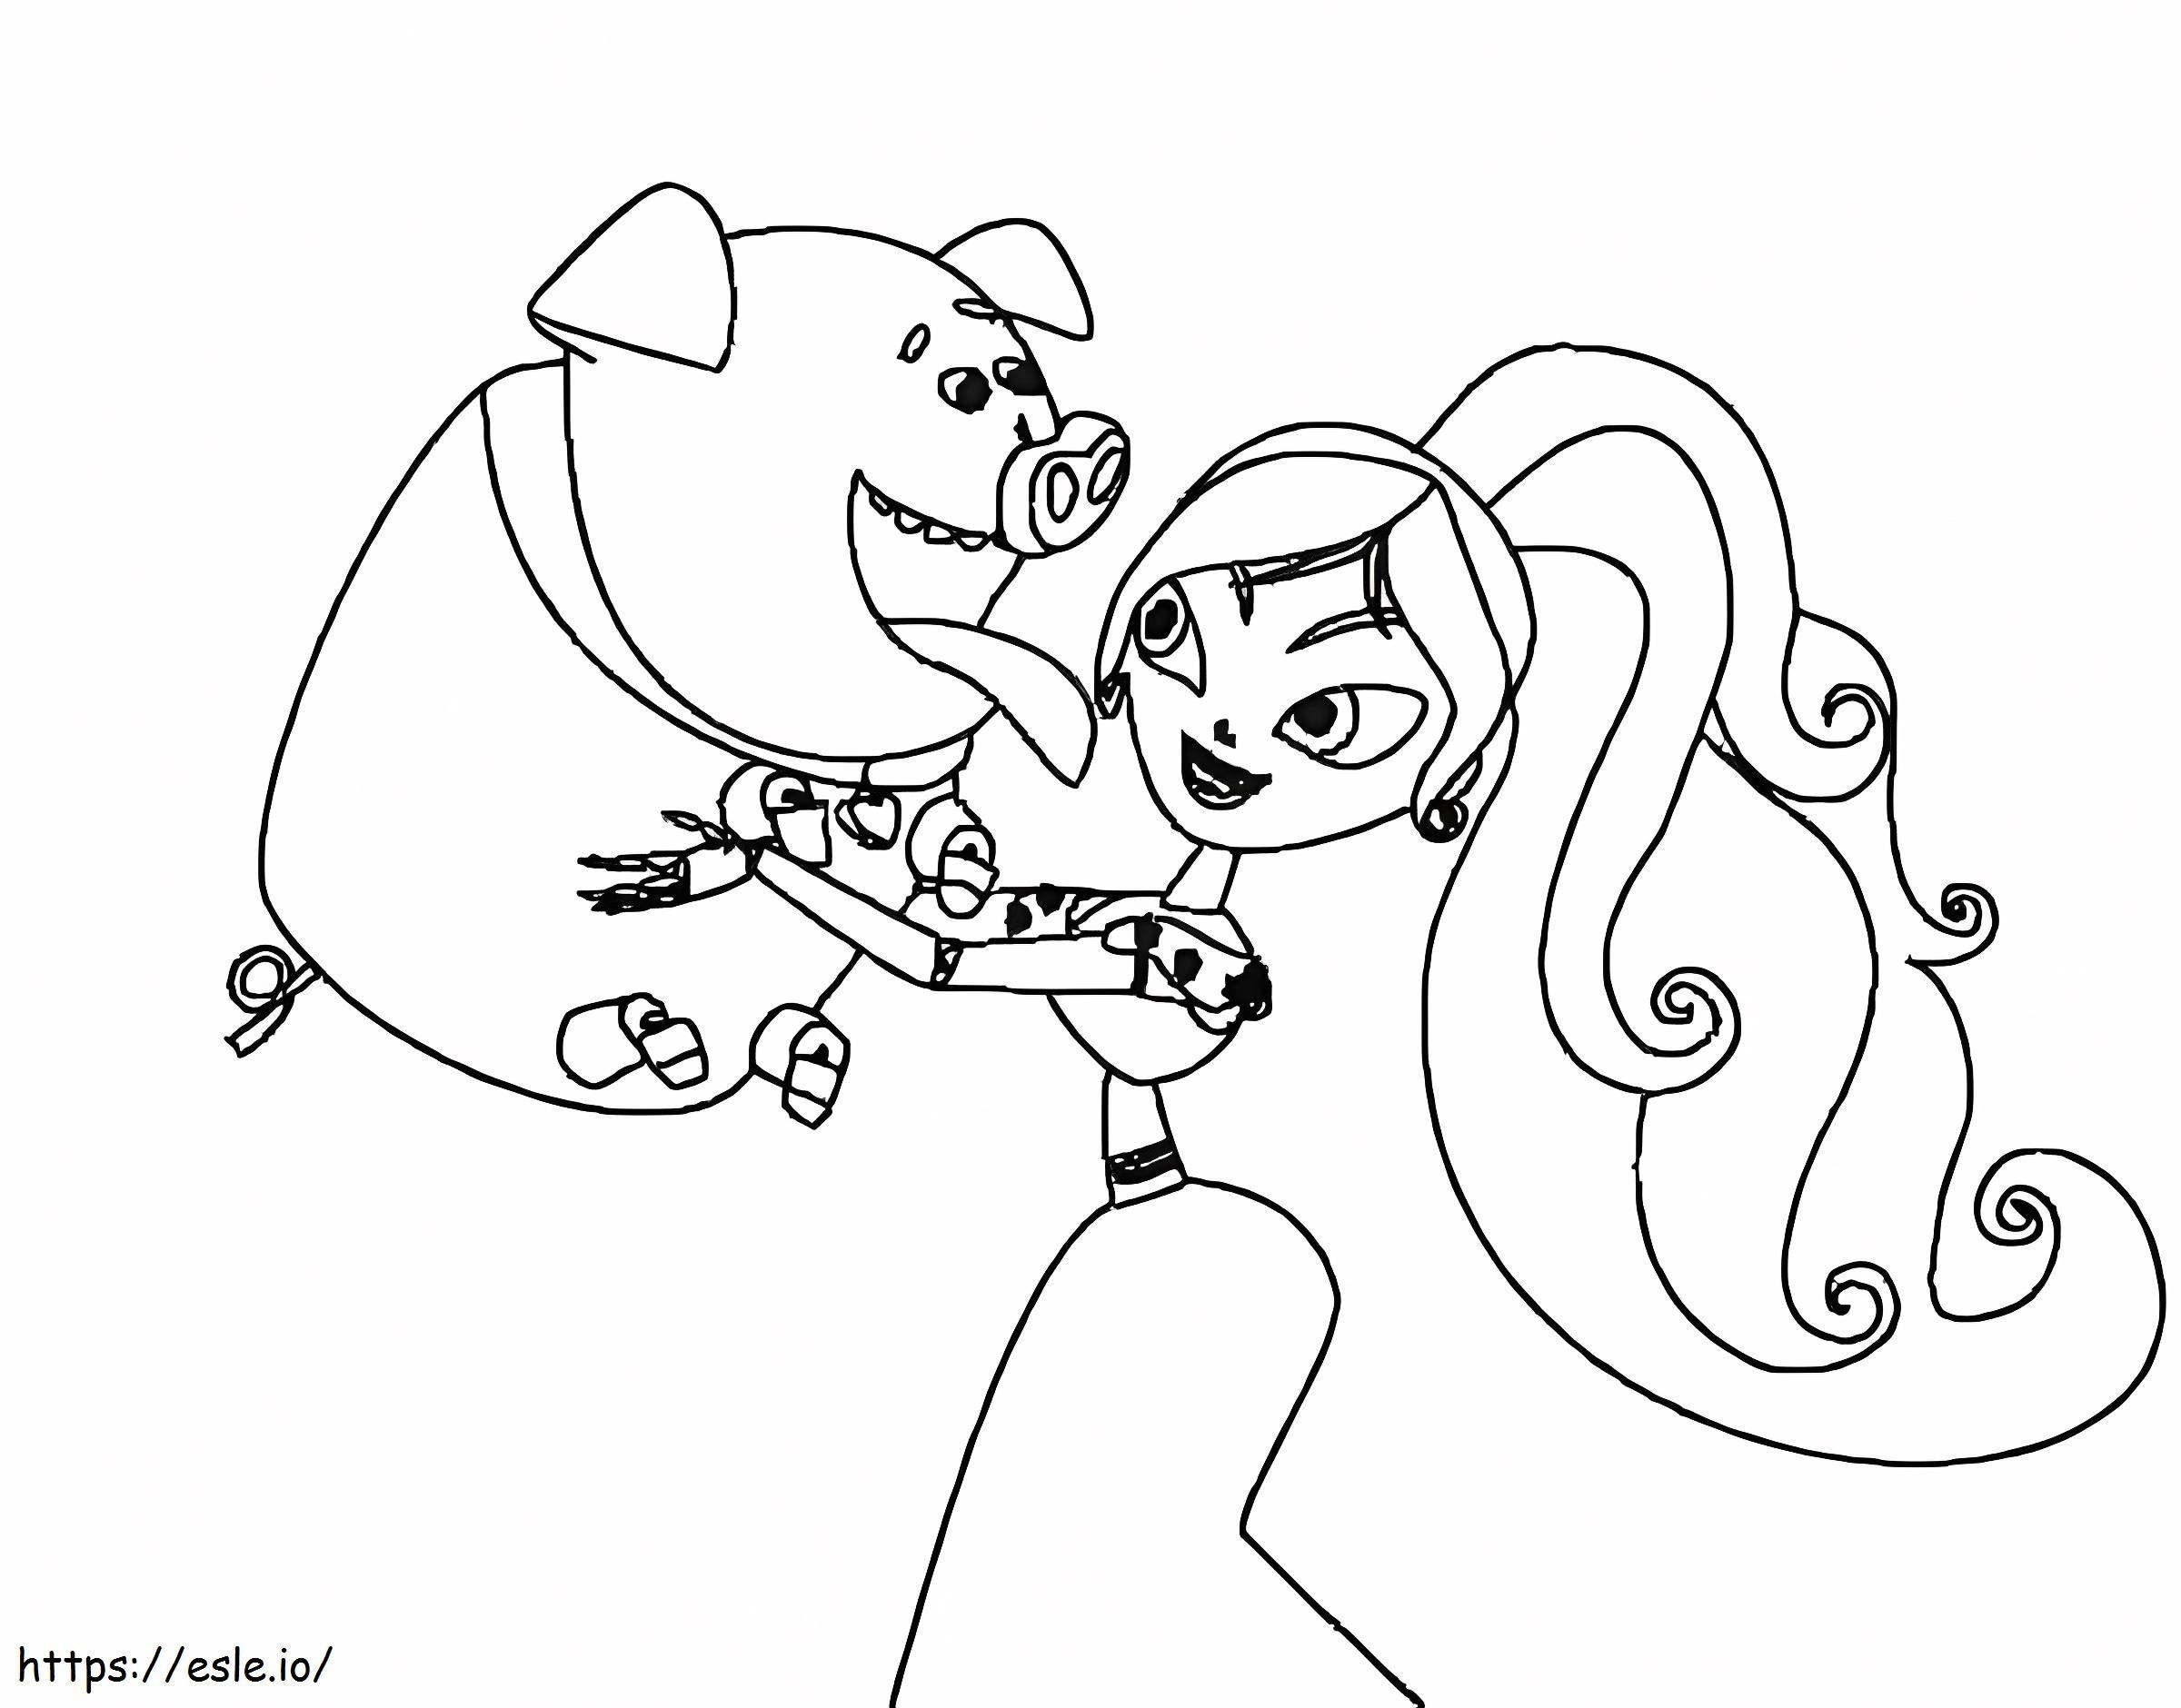 Maria And Chuy coloring page